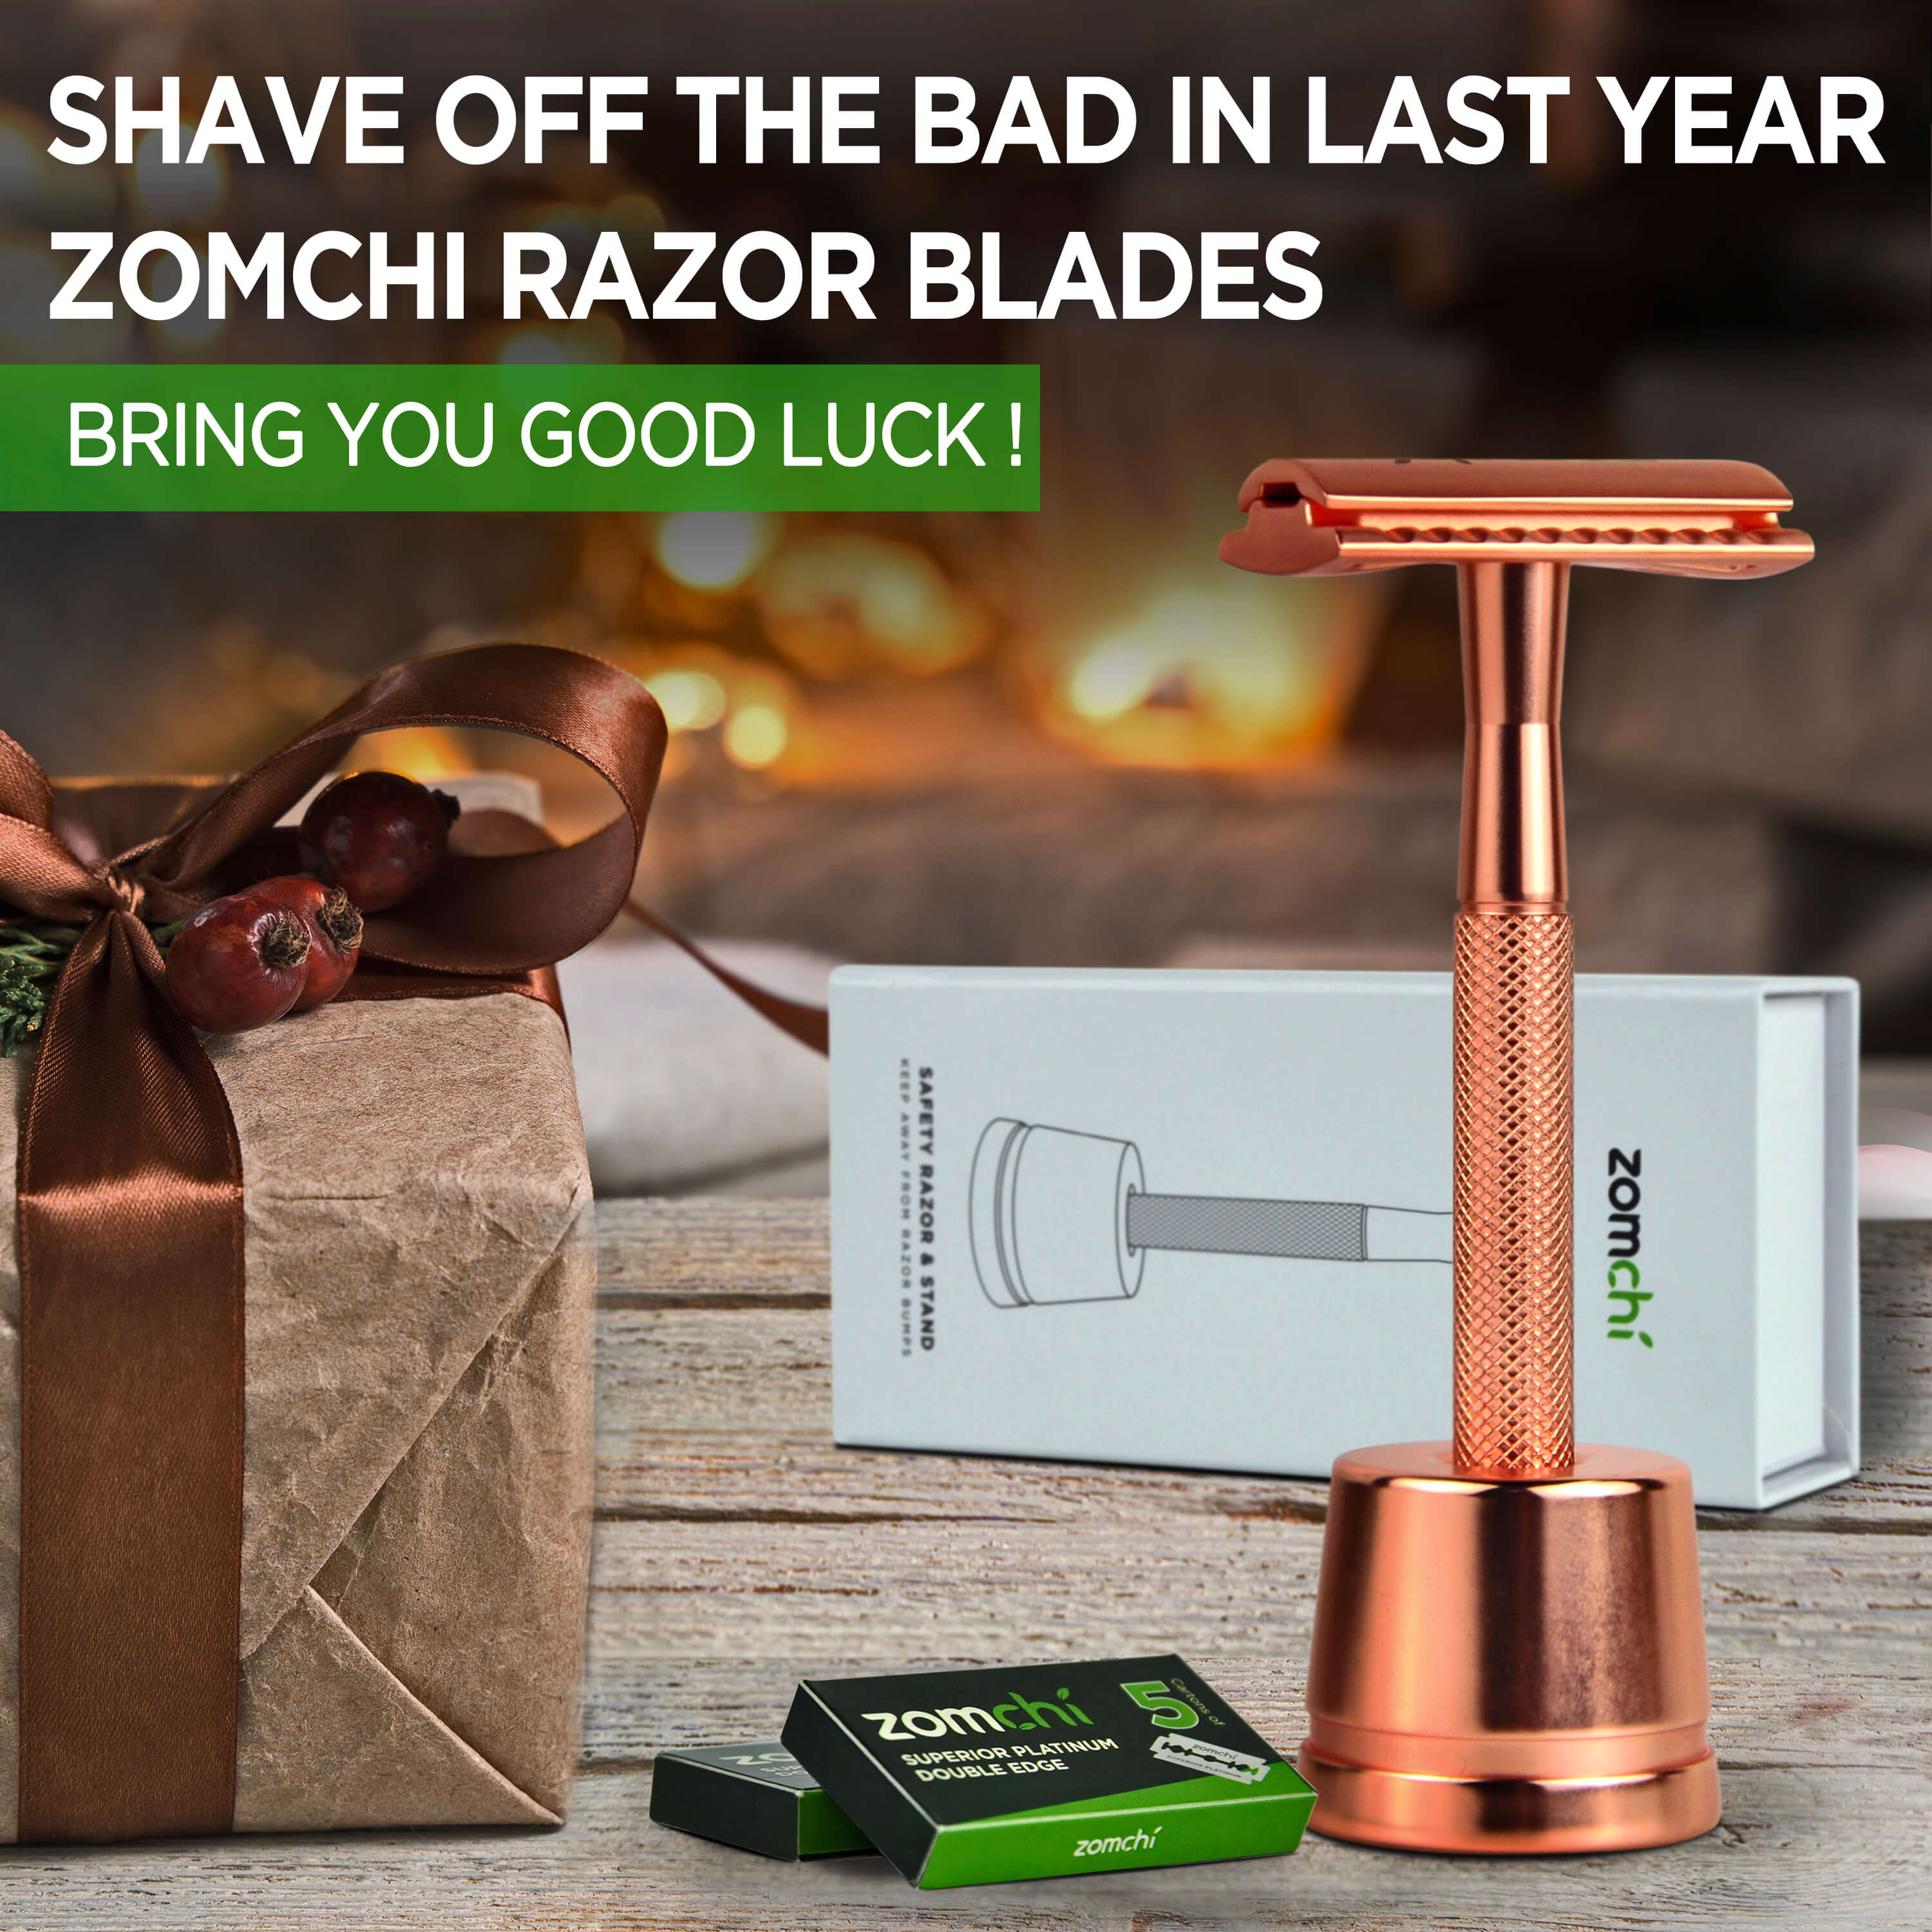 Give A Zomchi Safety Razor As A Holiday Gift